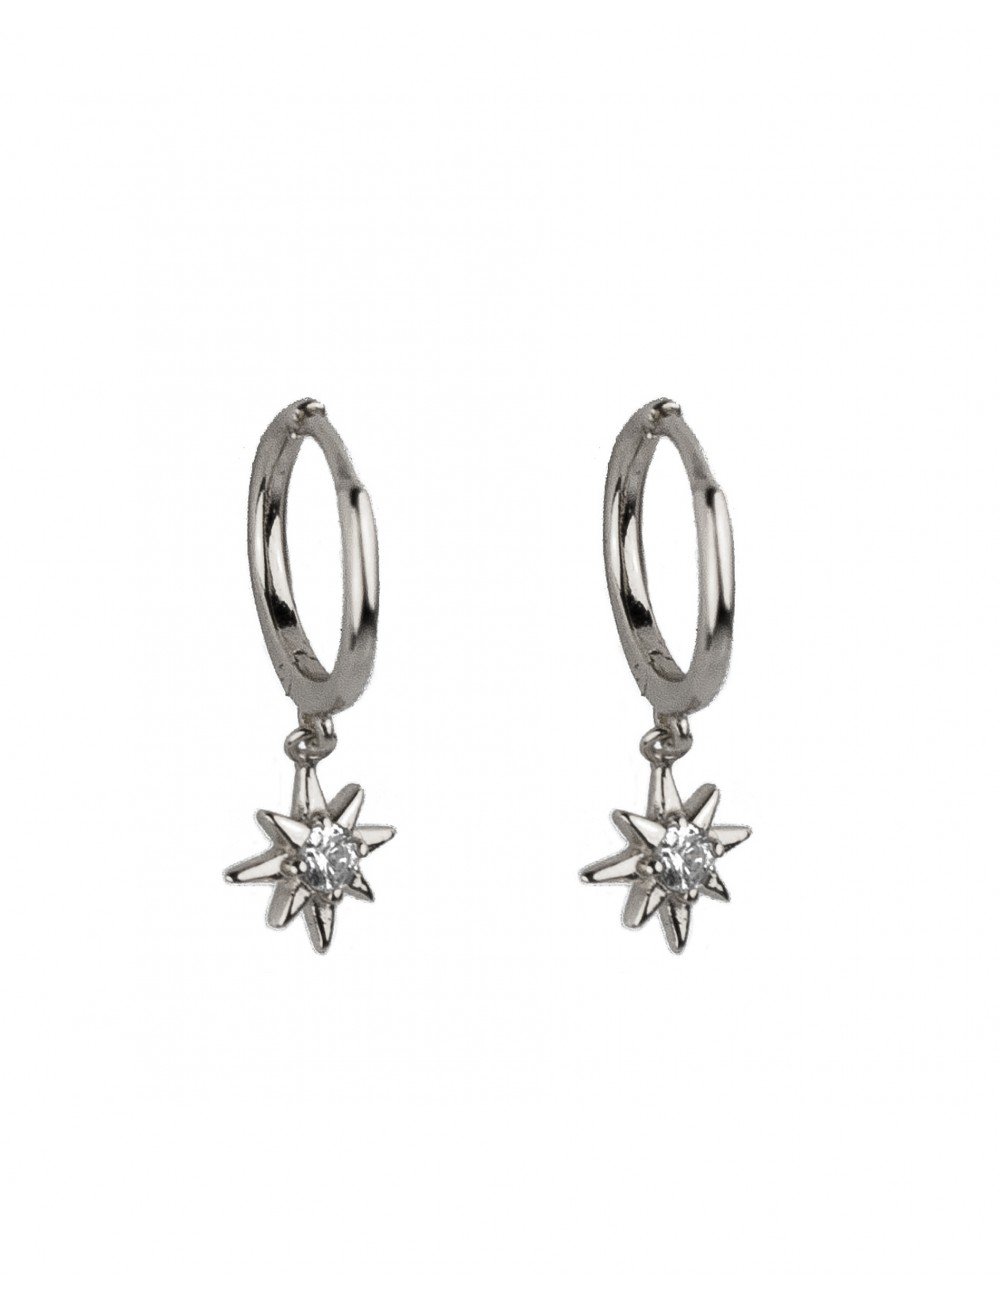 Earrings With Small Star and White Zirconia. 925 Sterling 